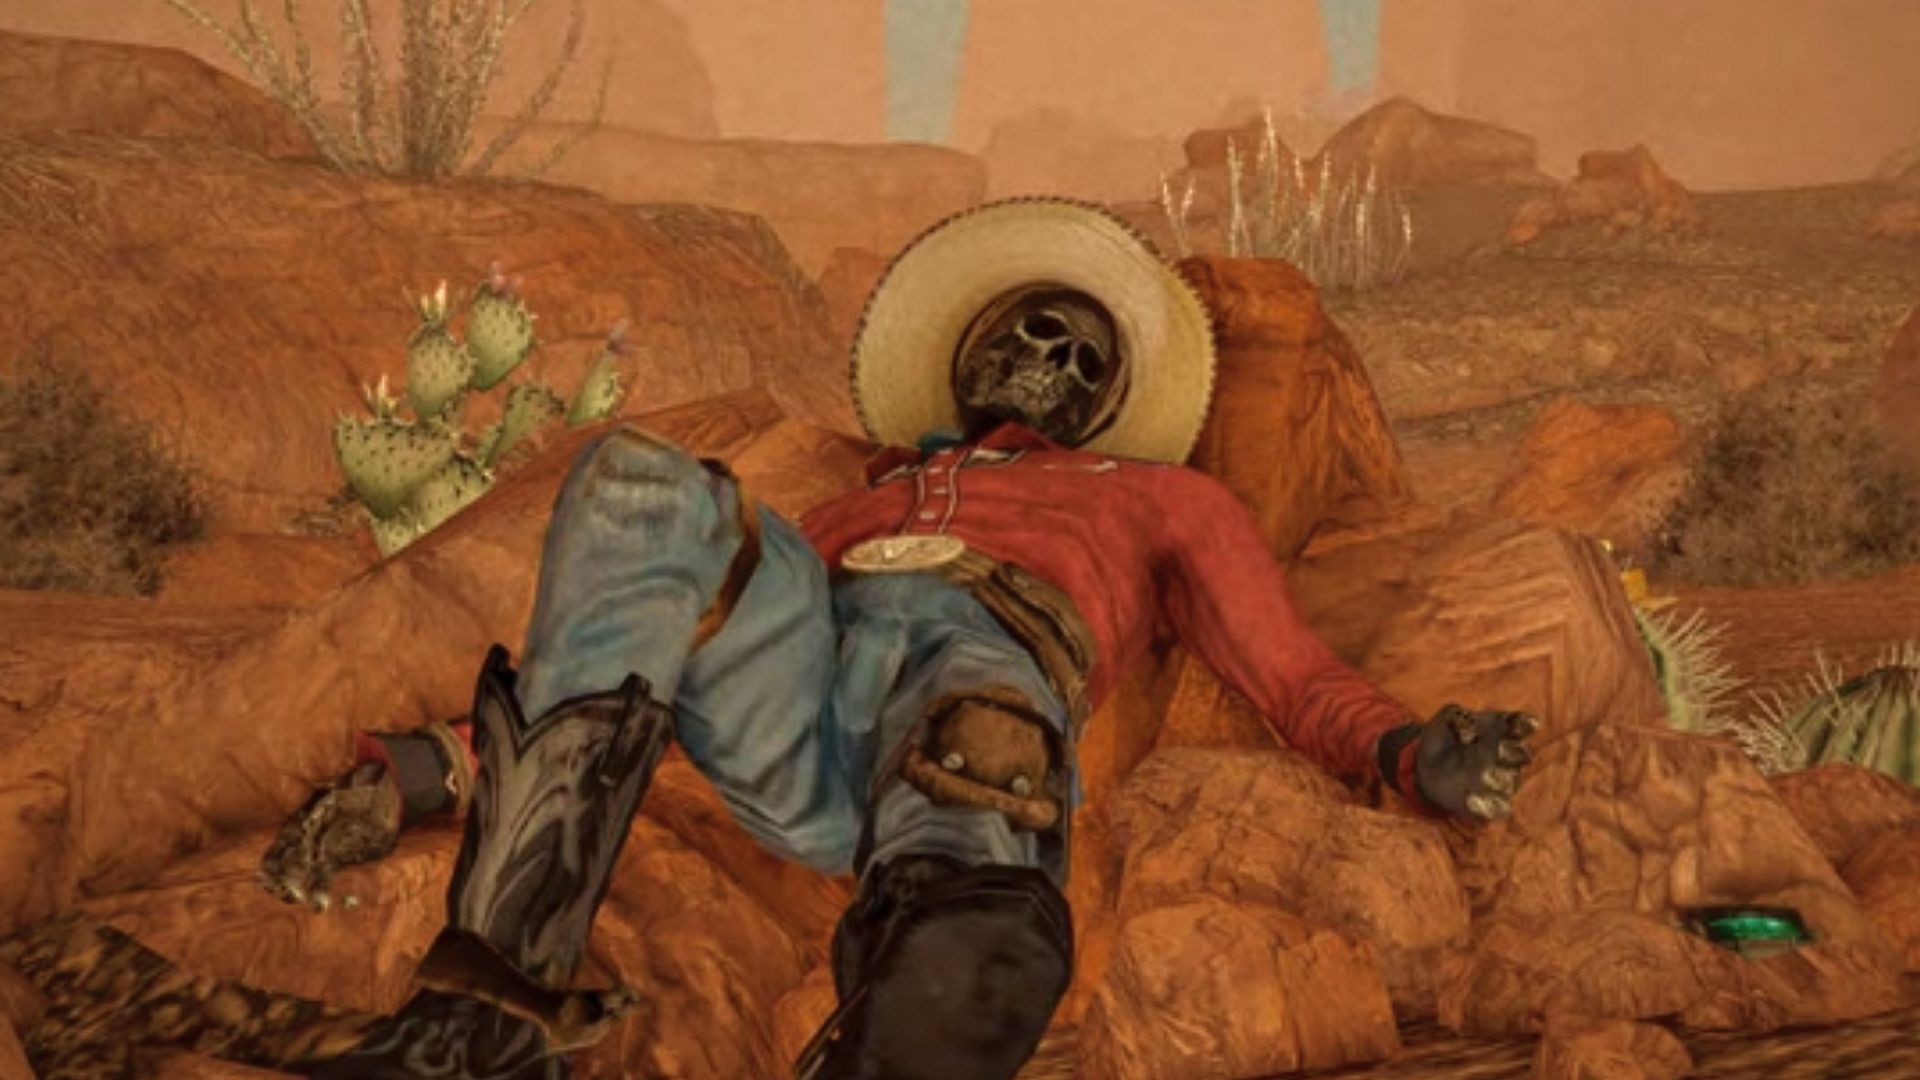 This astounding Fallout New Vegas conversion harkens to the '90s games